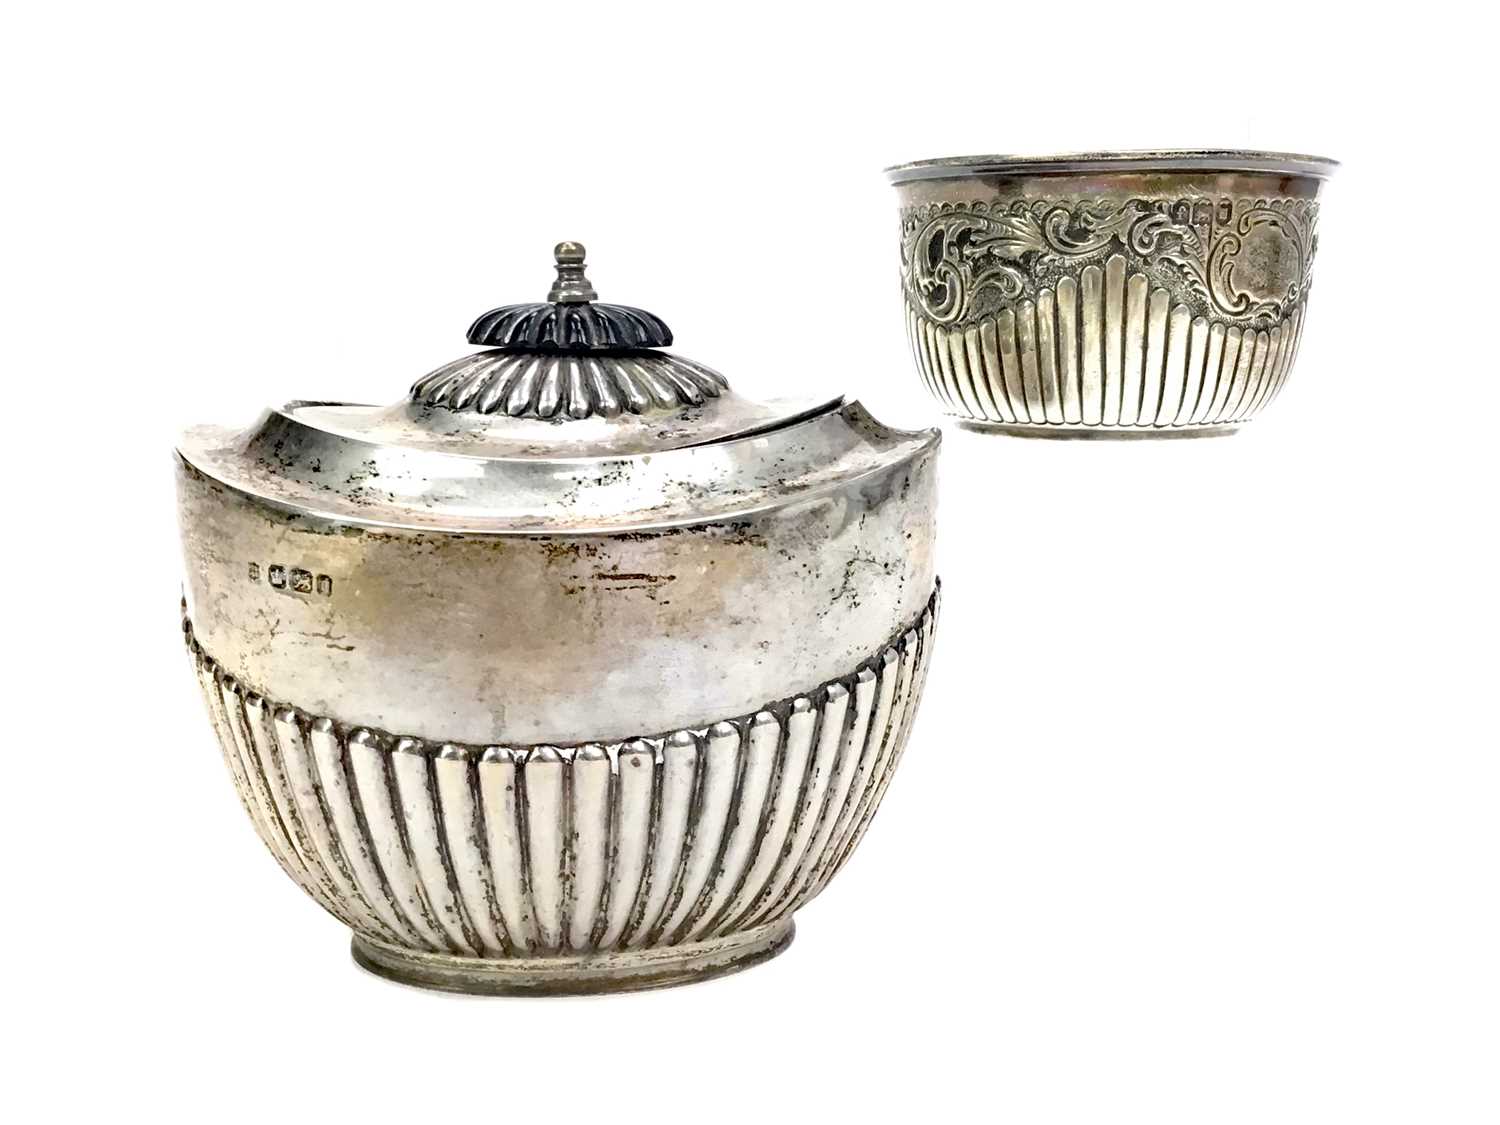 Lot 484 - A VICTORIAN SILVER SUGAR BOWL ALONG WITH ANOTHER